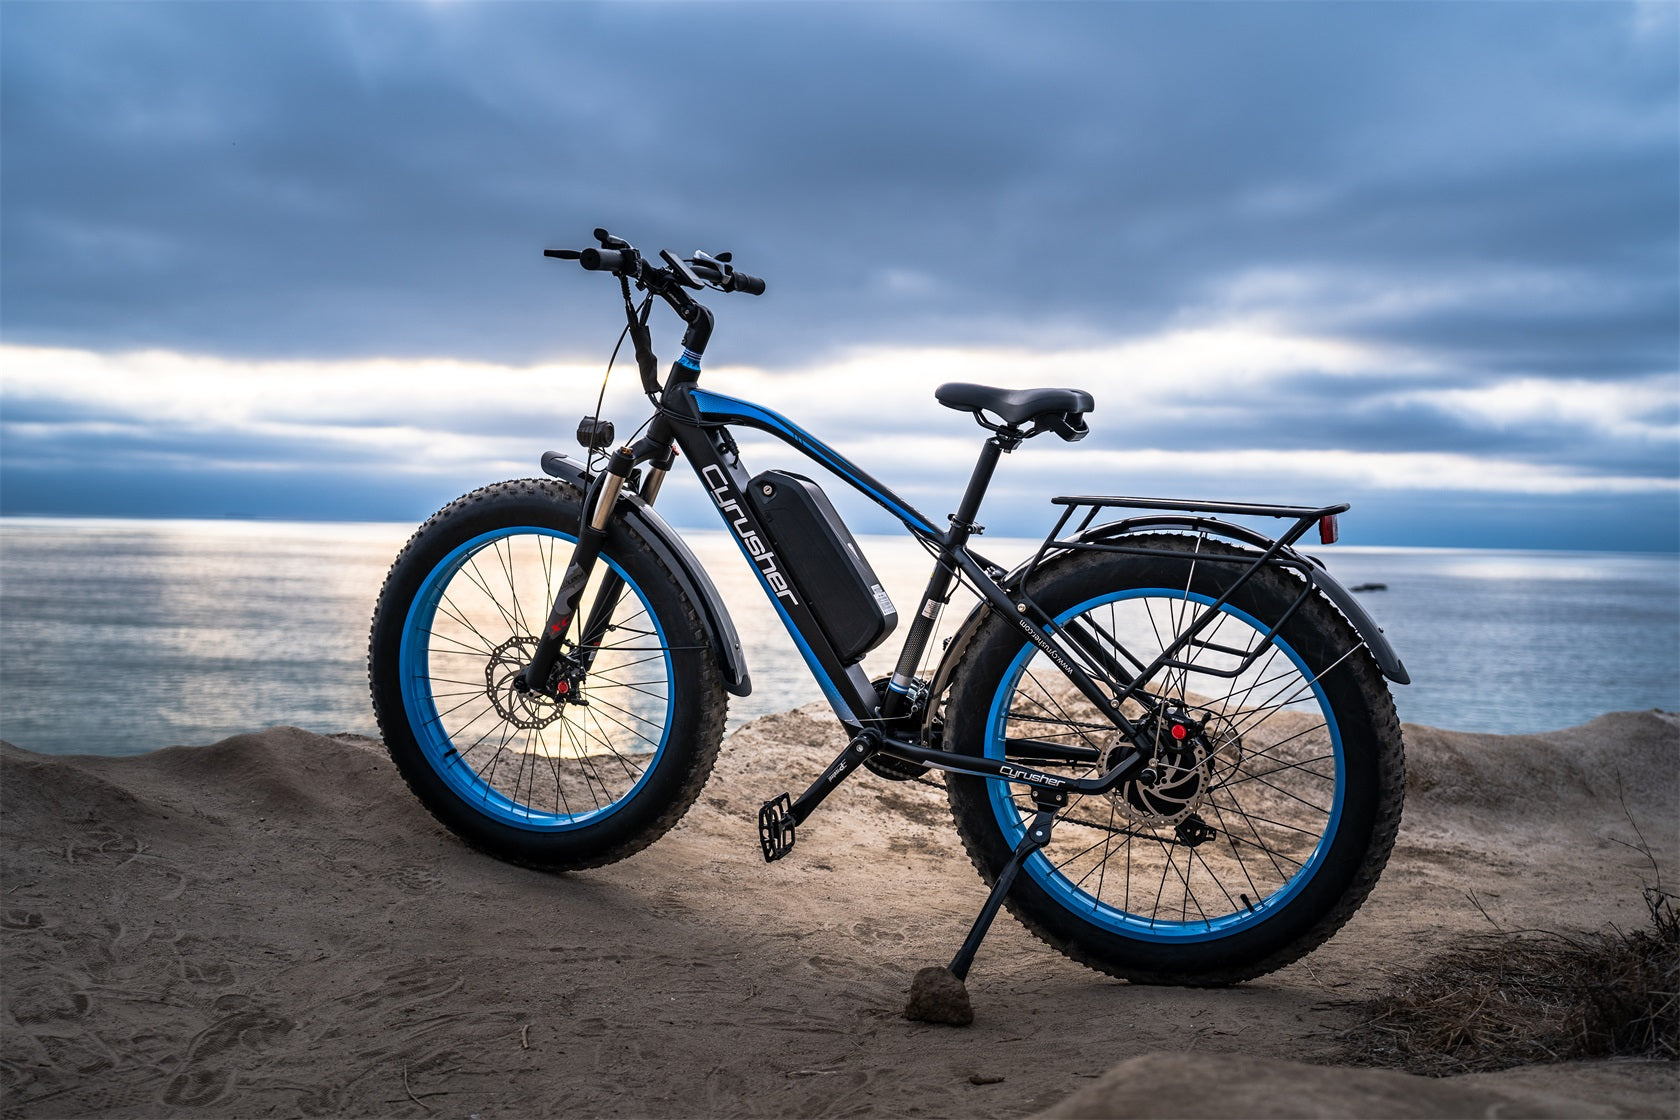 How much is an ebike worth?